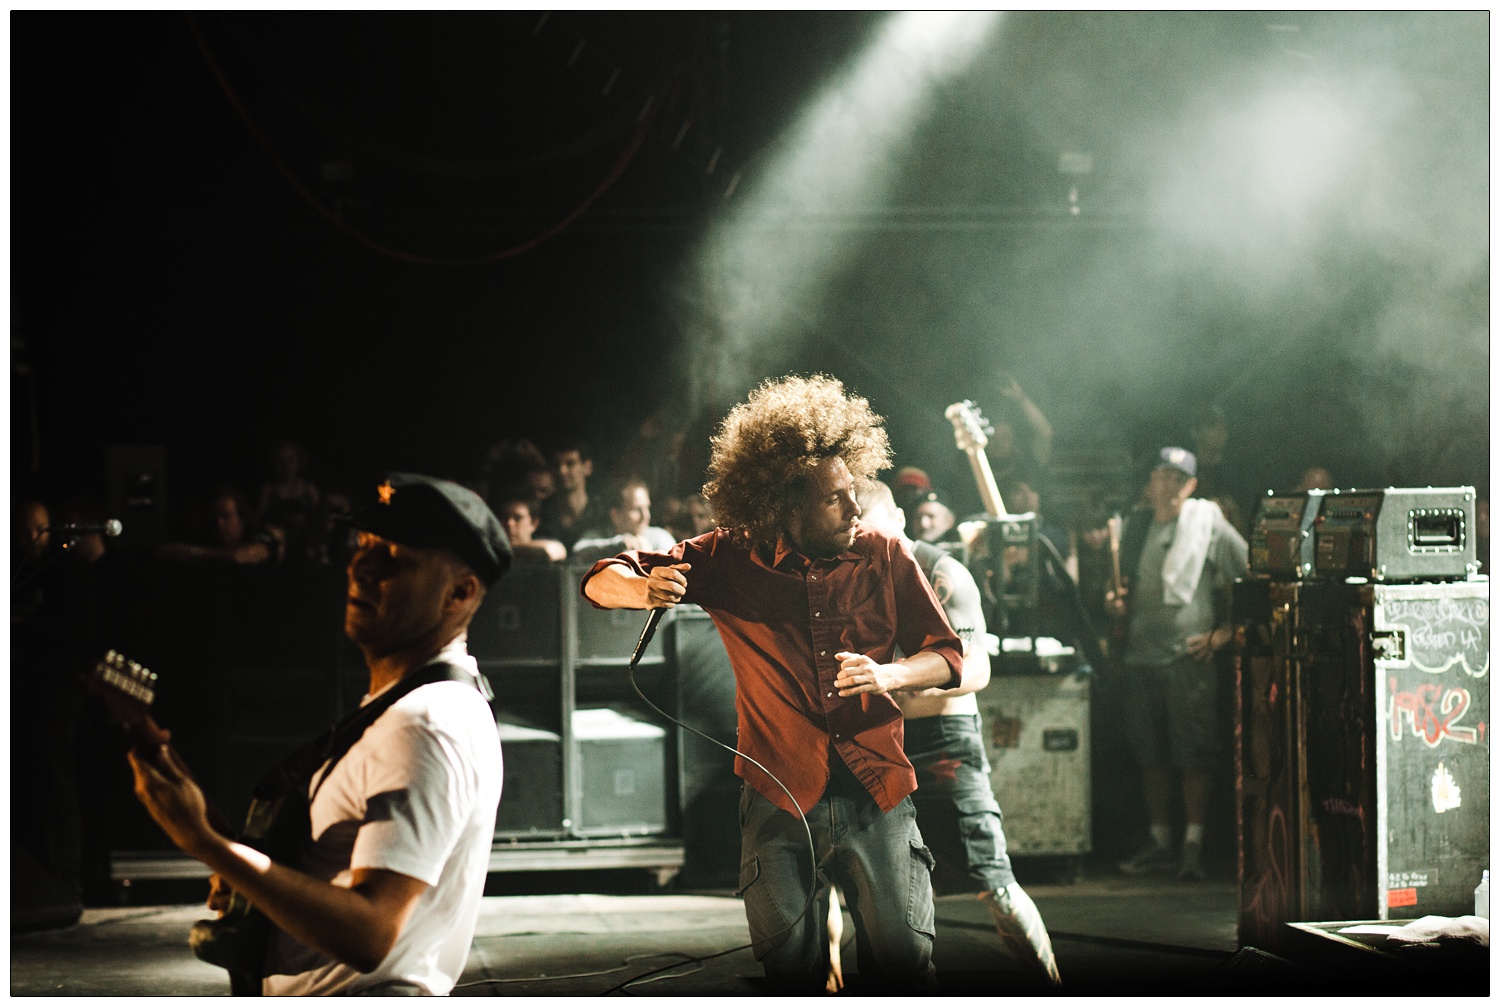 Action shot of Zack de la Rocha, Tom Morello and Tim Commerford on stage in 2010 in London. Onlookers from the side of stage.